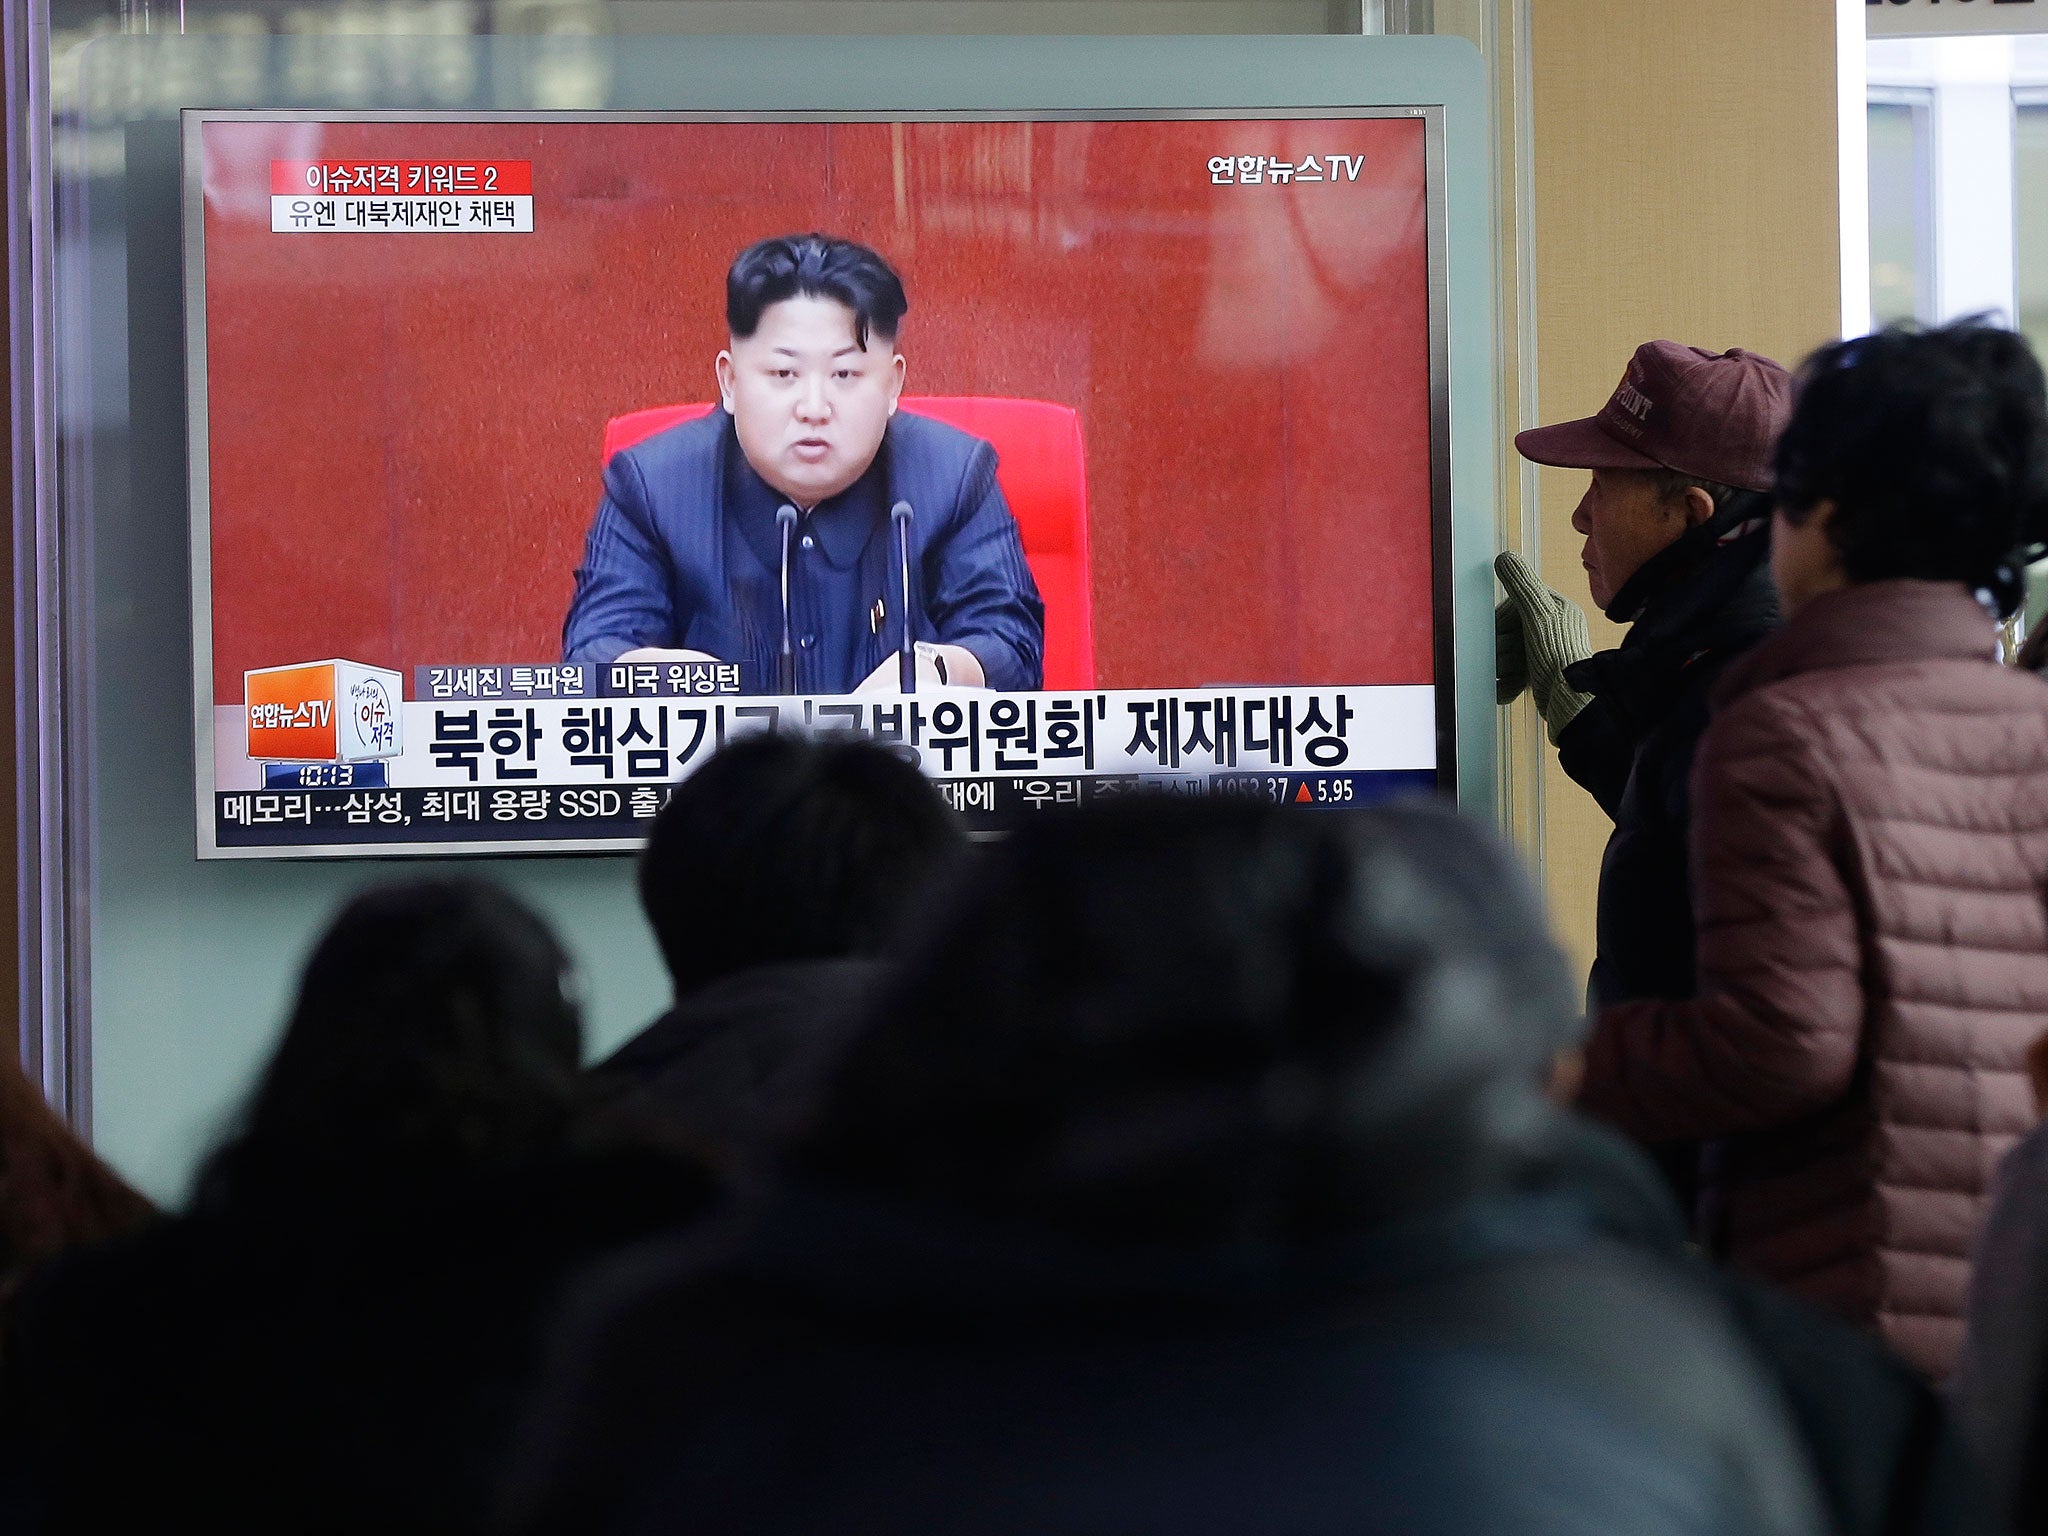 North Korean leader Kim Jong-un addresses the country after the UN imposed harsh new sanctions in response to the regime’s nuclear programme